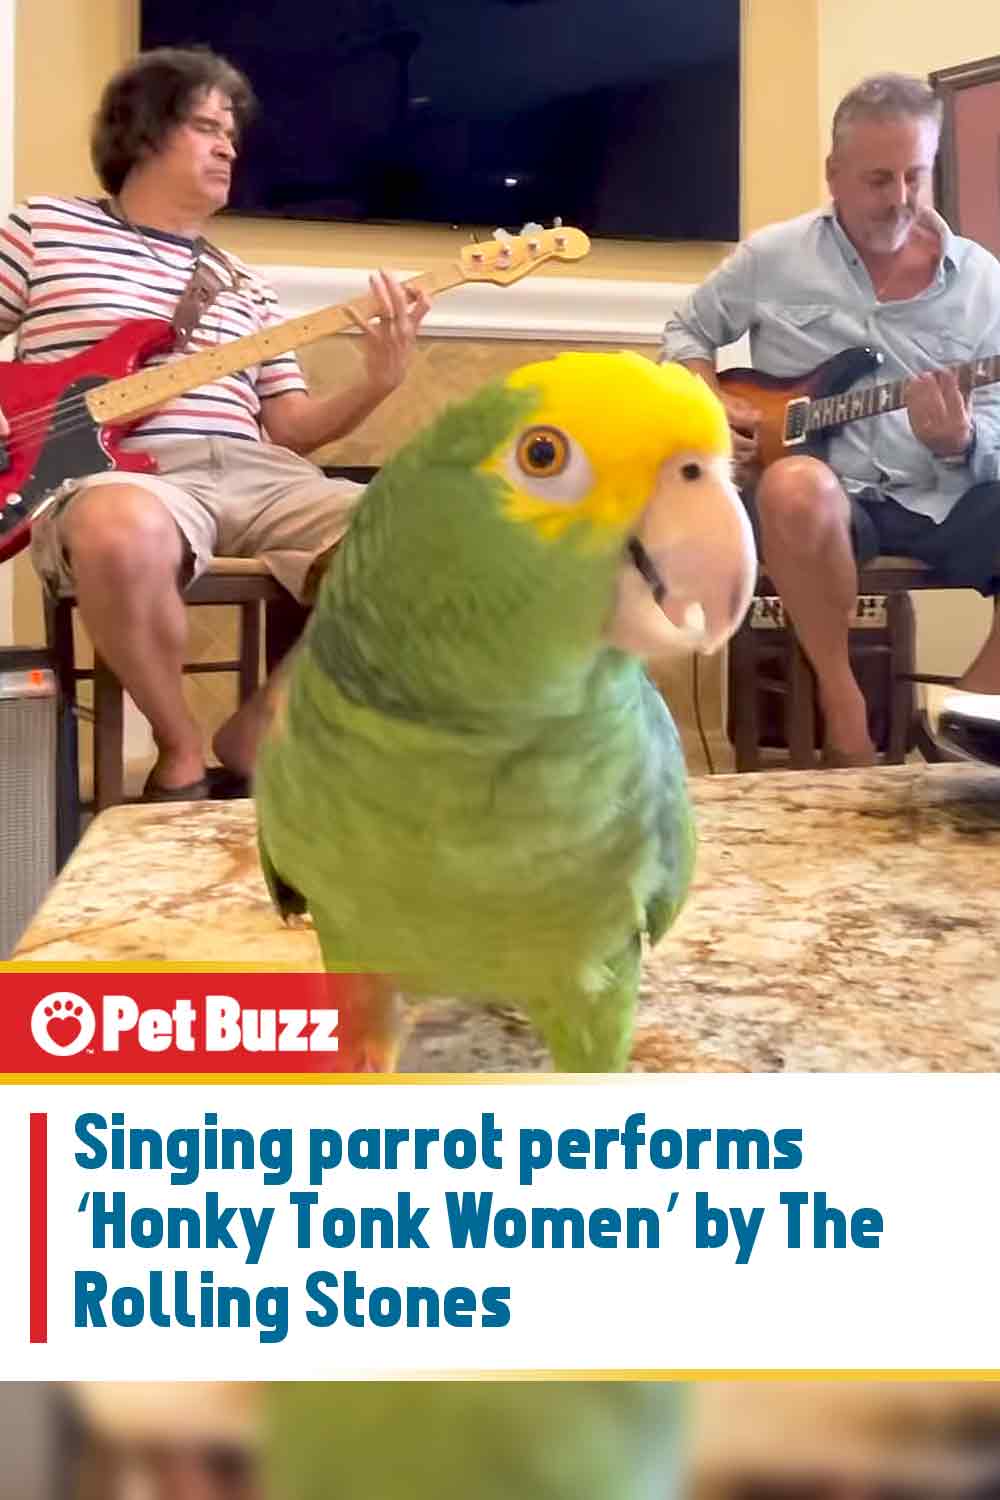 Singing parrot performs ‘Honky Tonk Women’ by The Rolling Stones